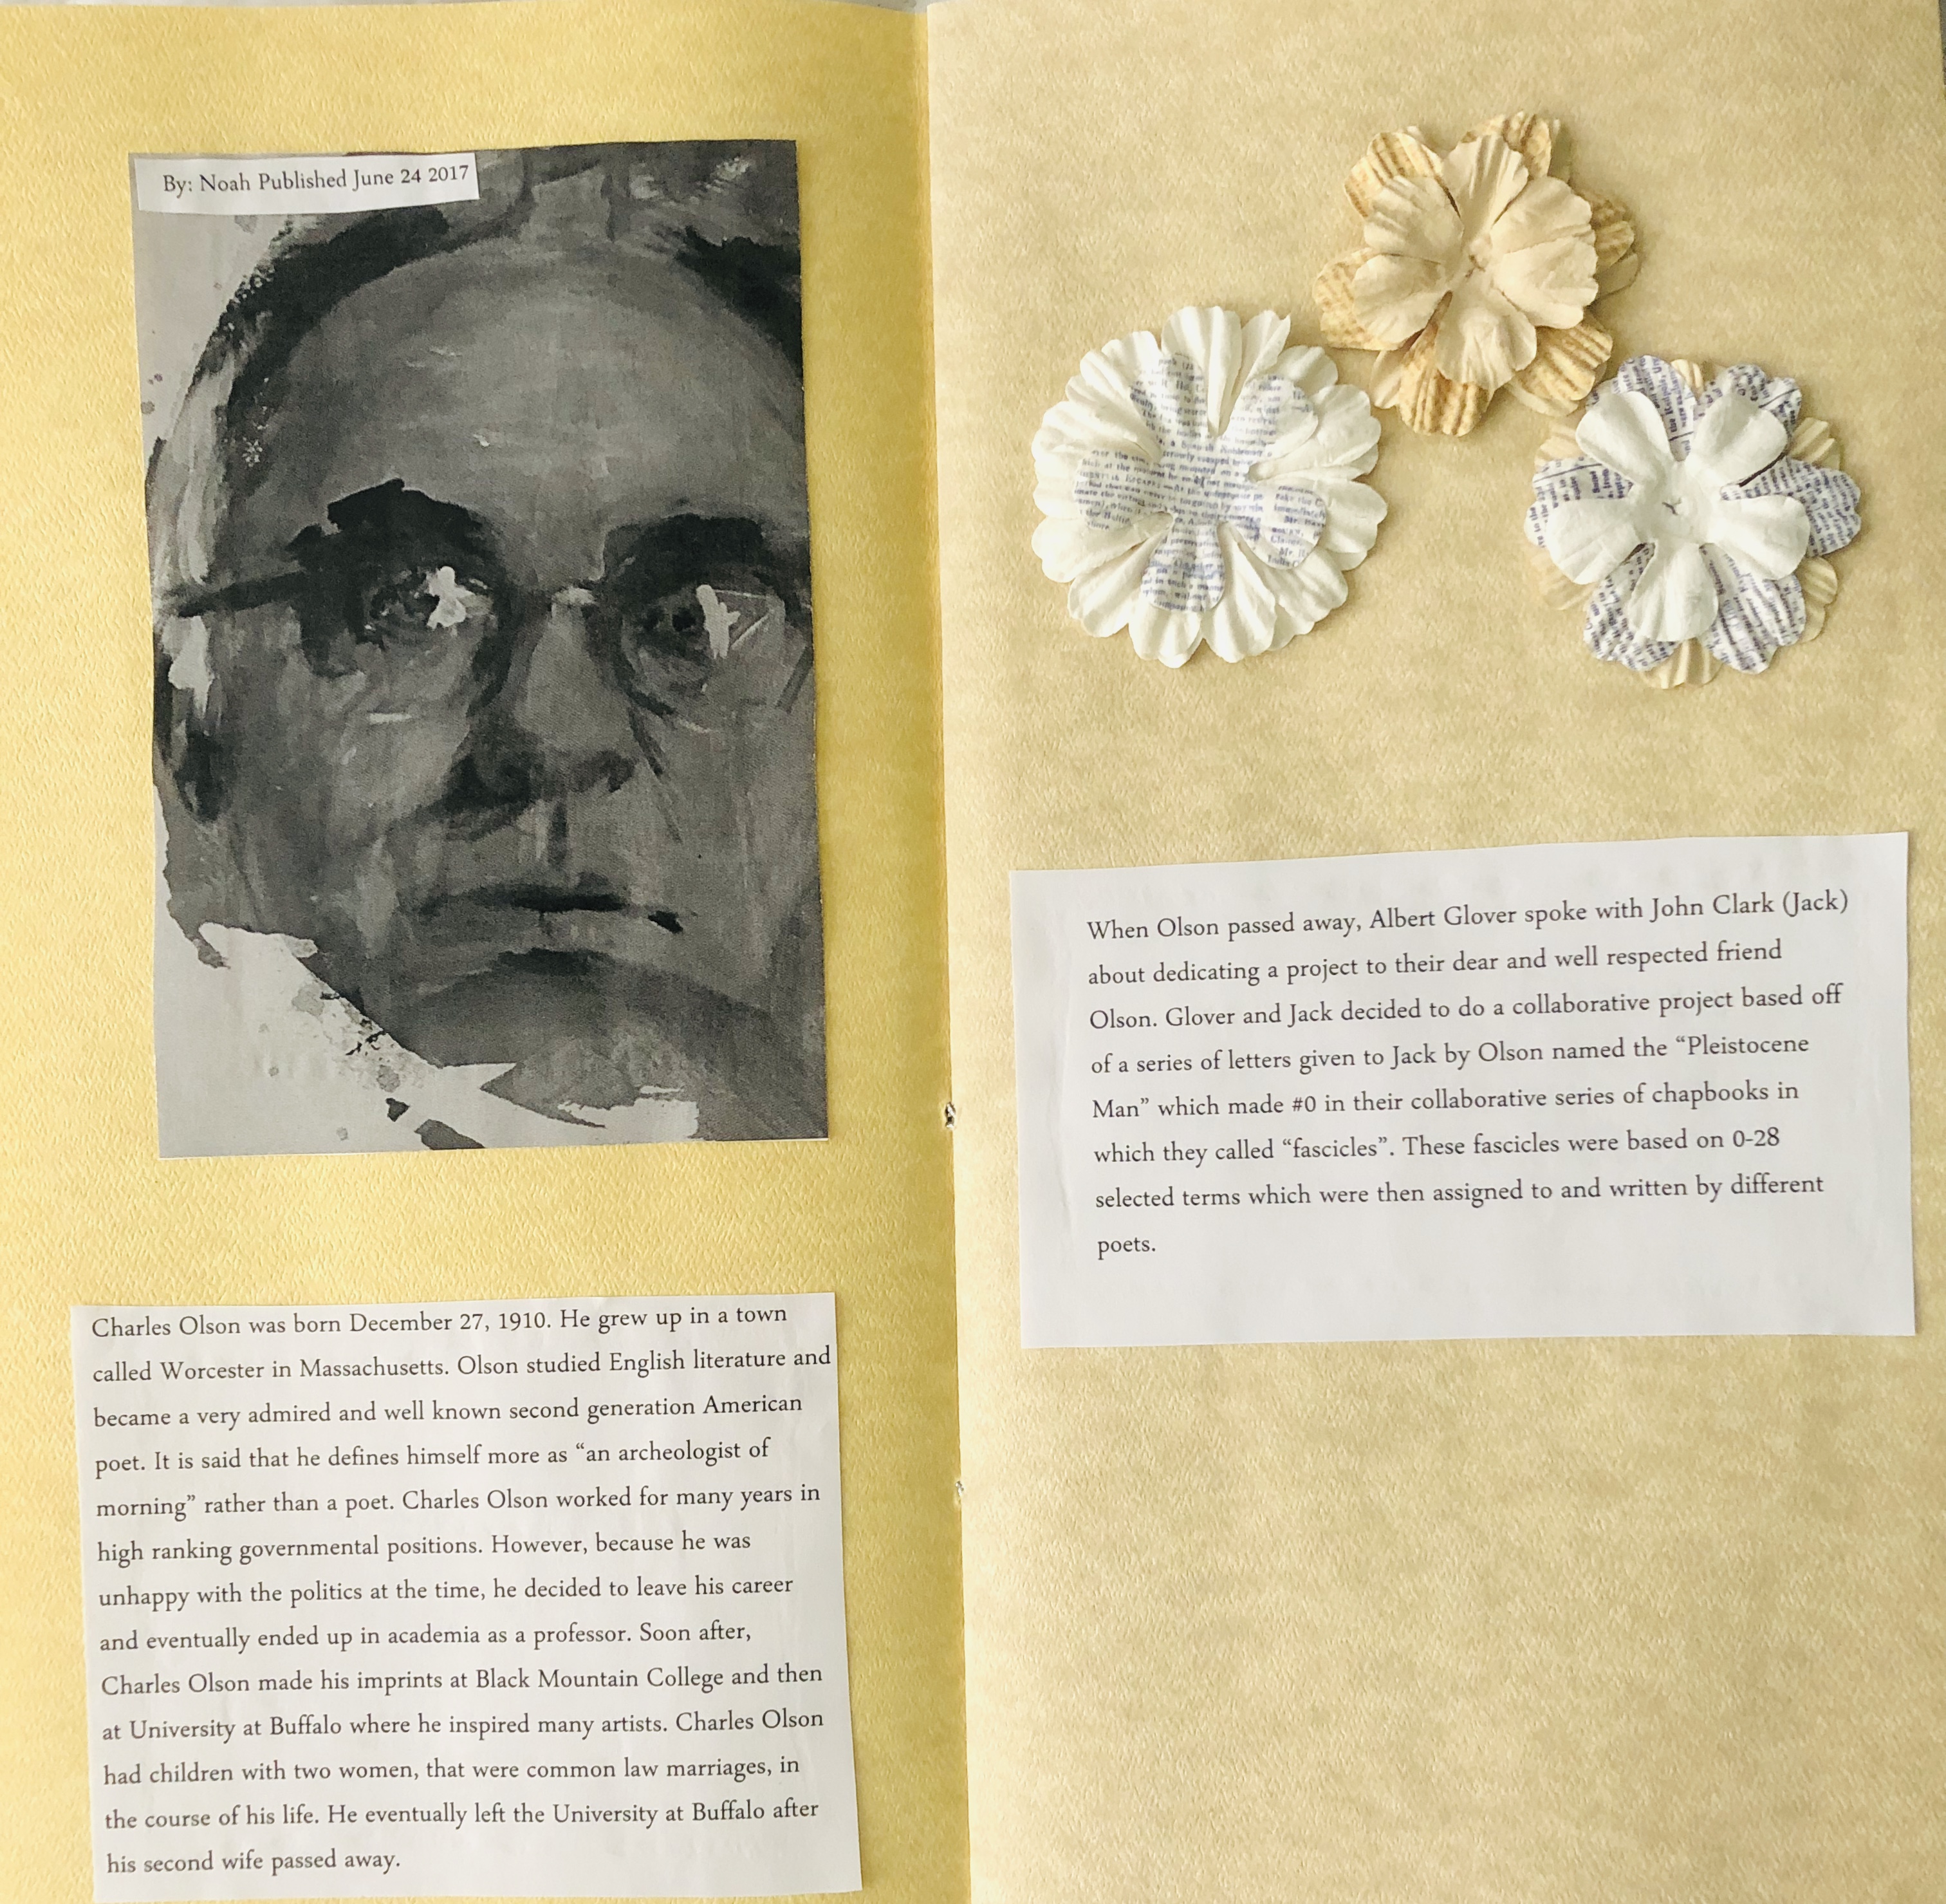 Pages 3-4: On the third page is a photo of Charles Olson and includes a brief description of his life. On the fourth page, are some cloth or paper like flowers also purchased at Michaels as well as a description of “The Curriculum of the Soul” collaborative project dedicated to Olson after he passed away.